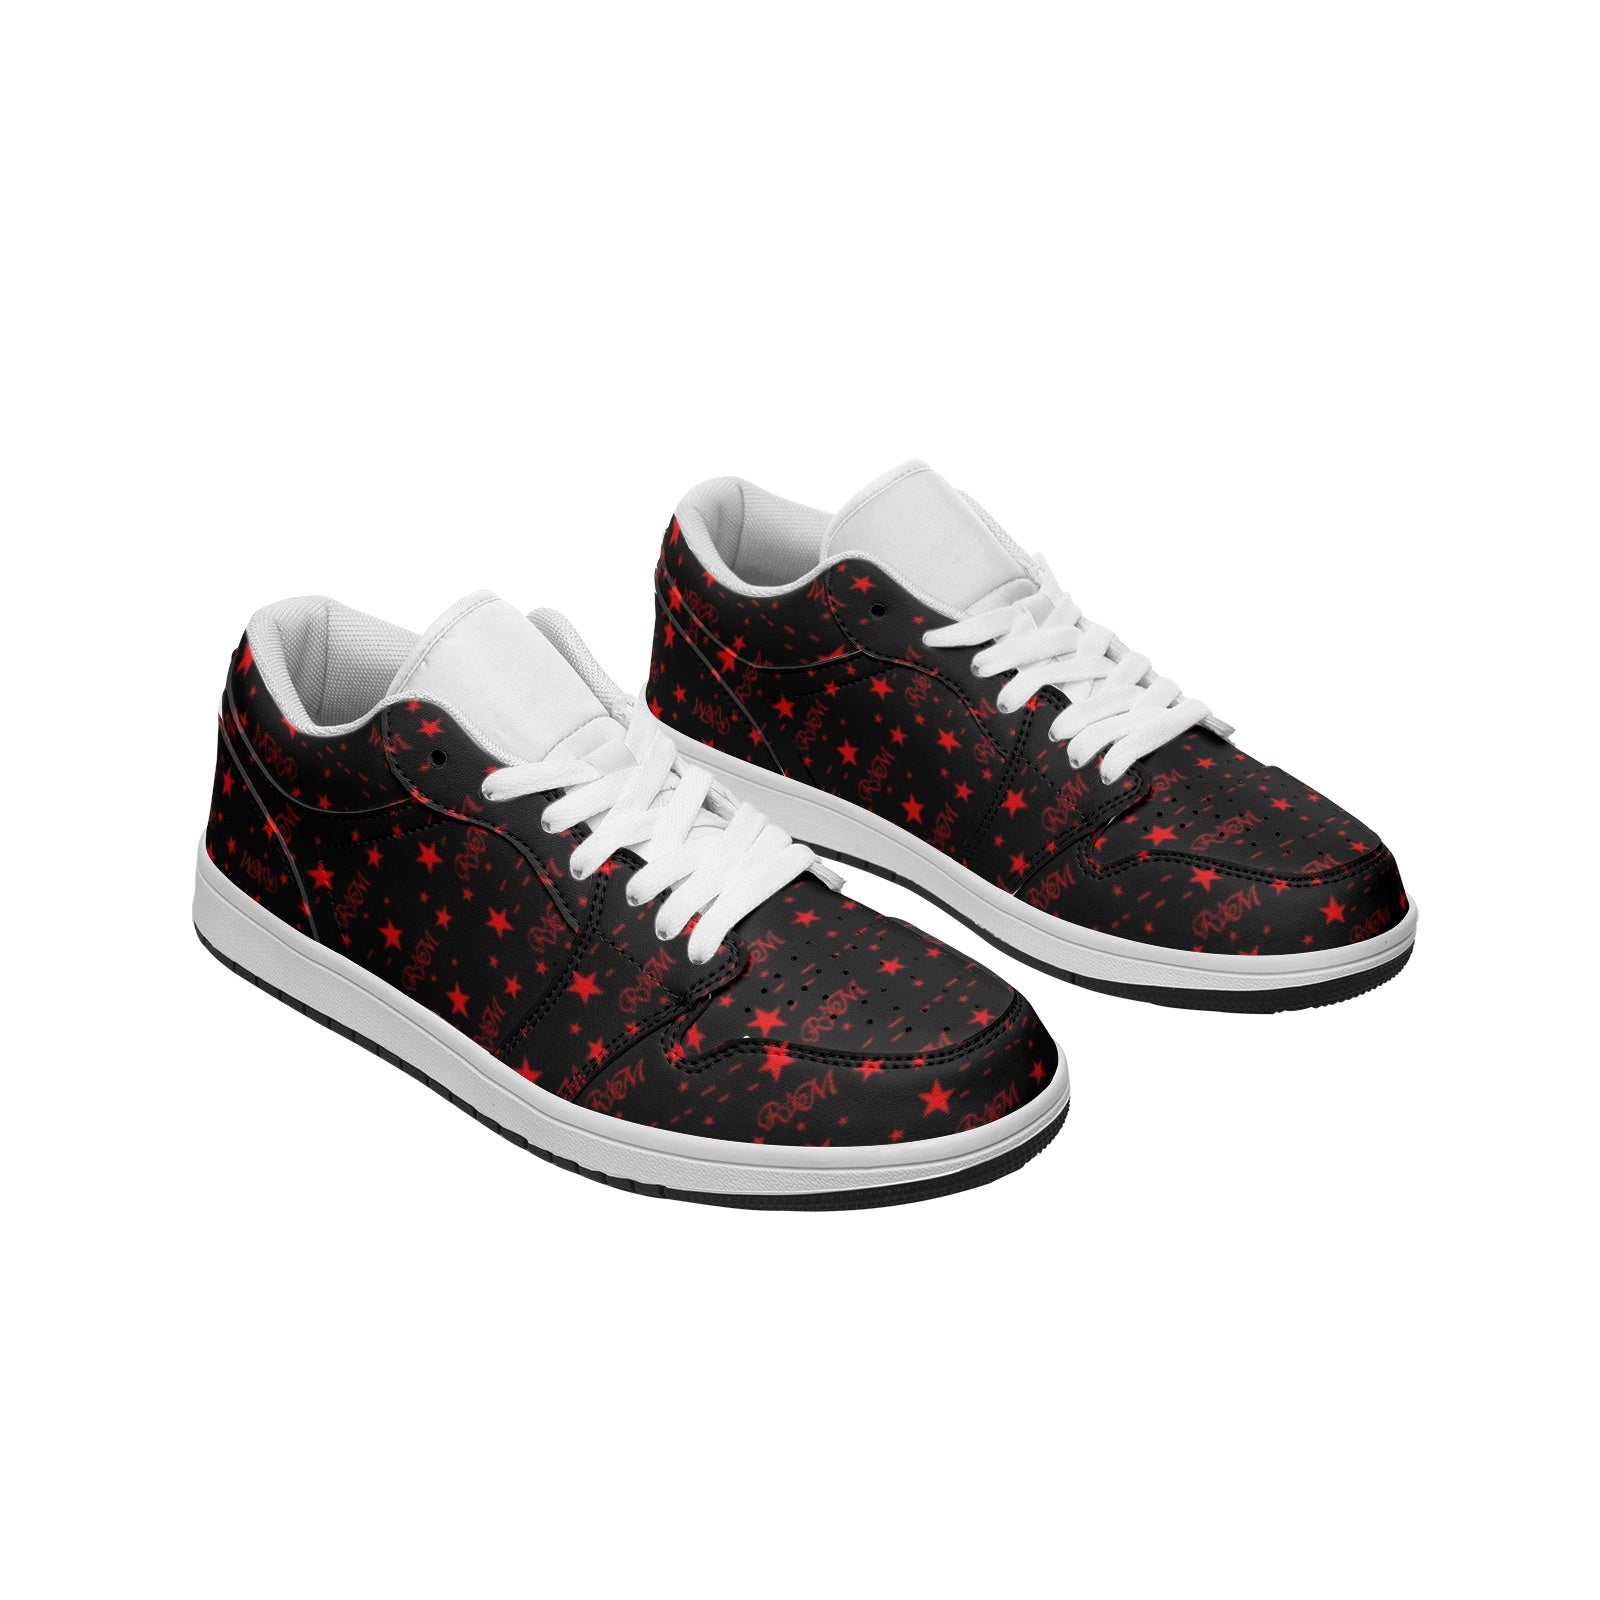 ReB Unisex Low Top Leather Sneakers